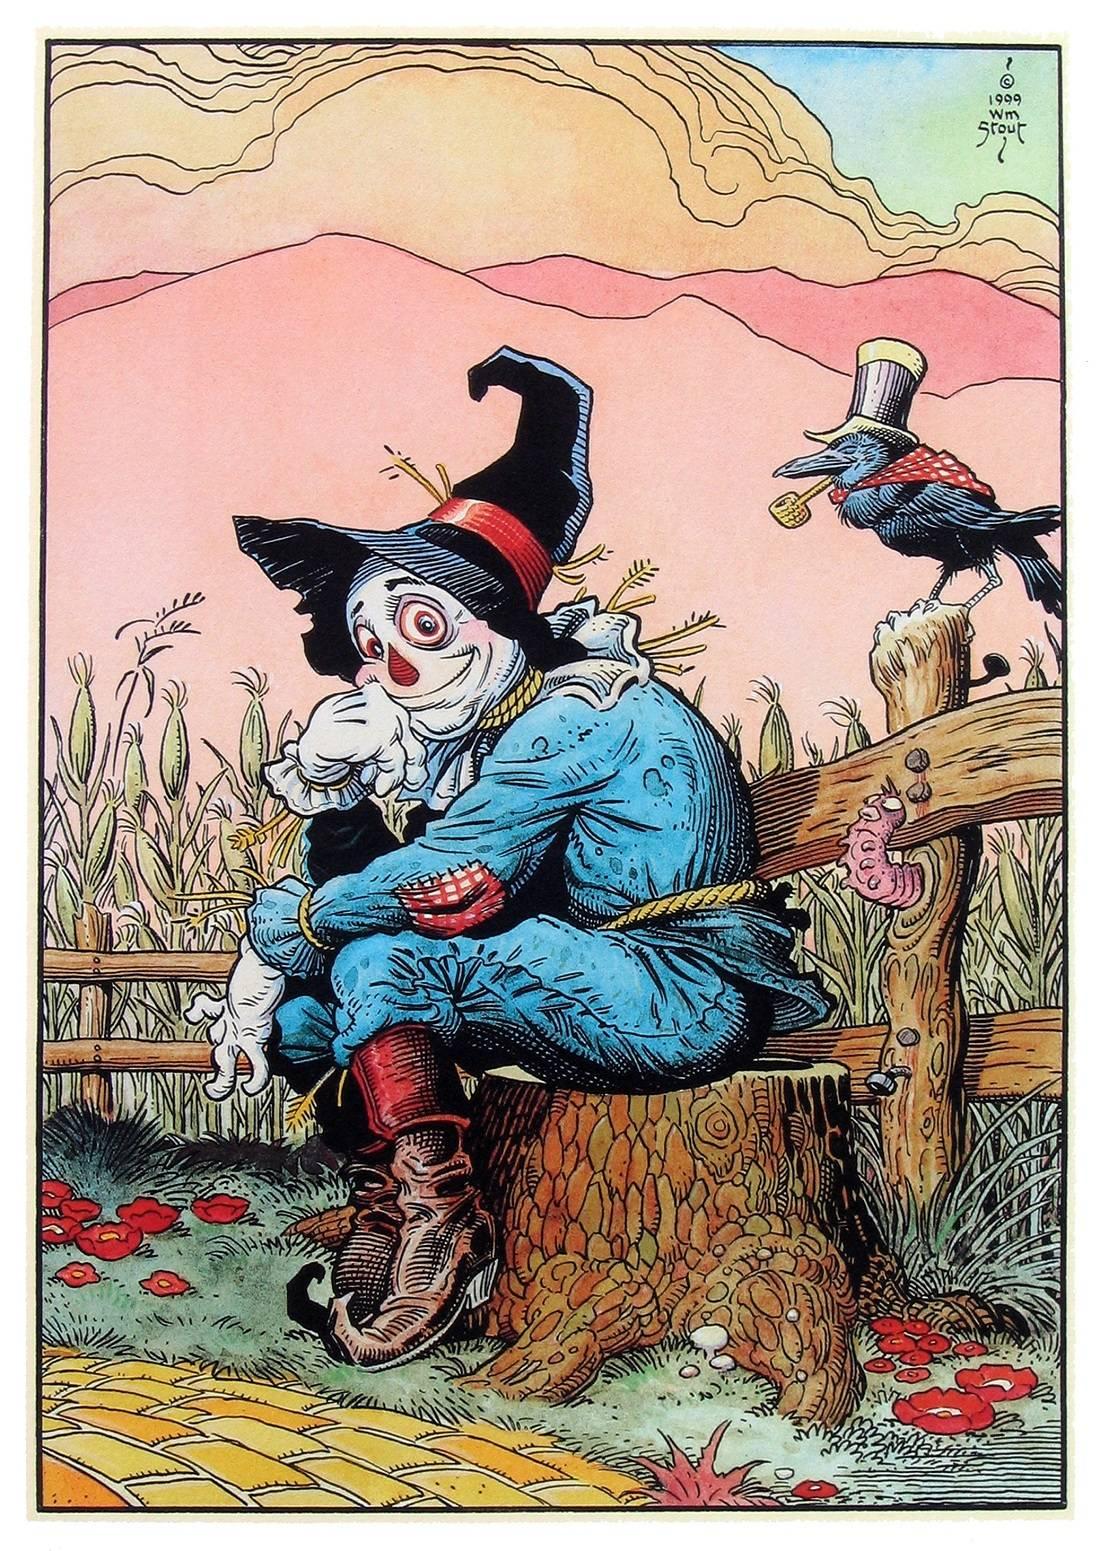 Scarecrow of OZ - Art by William Stout